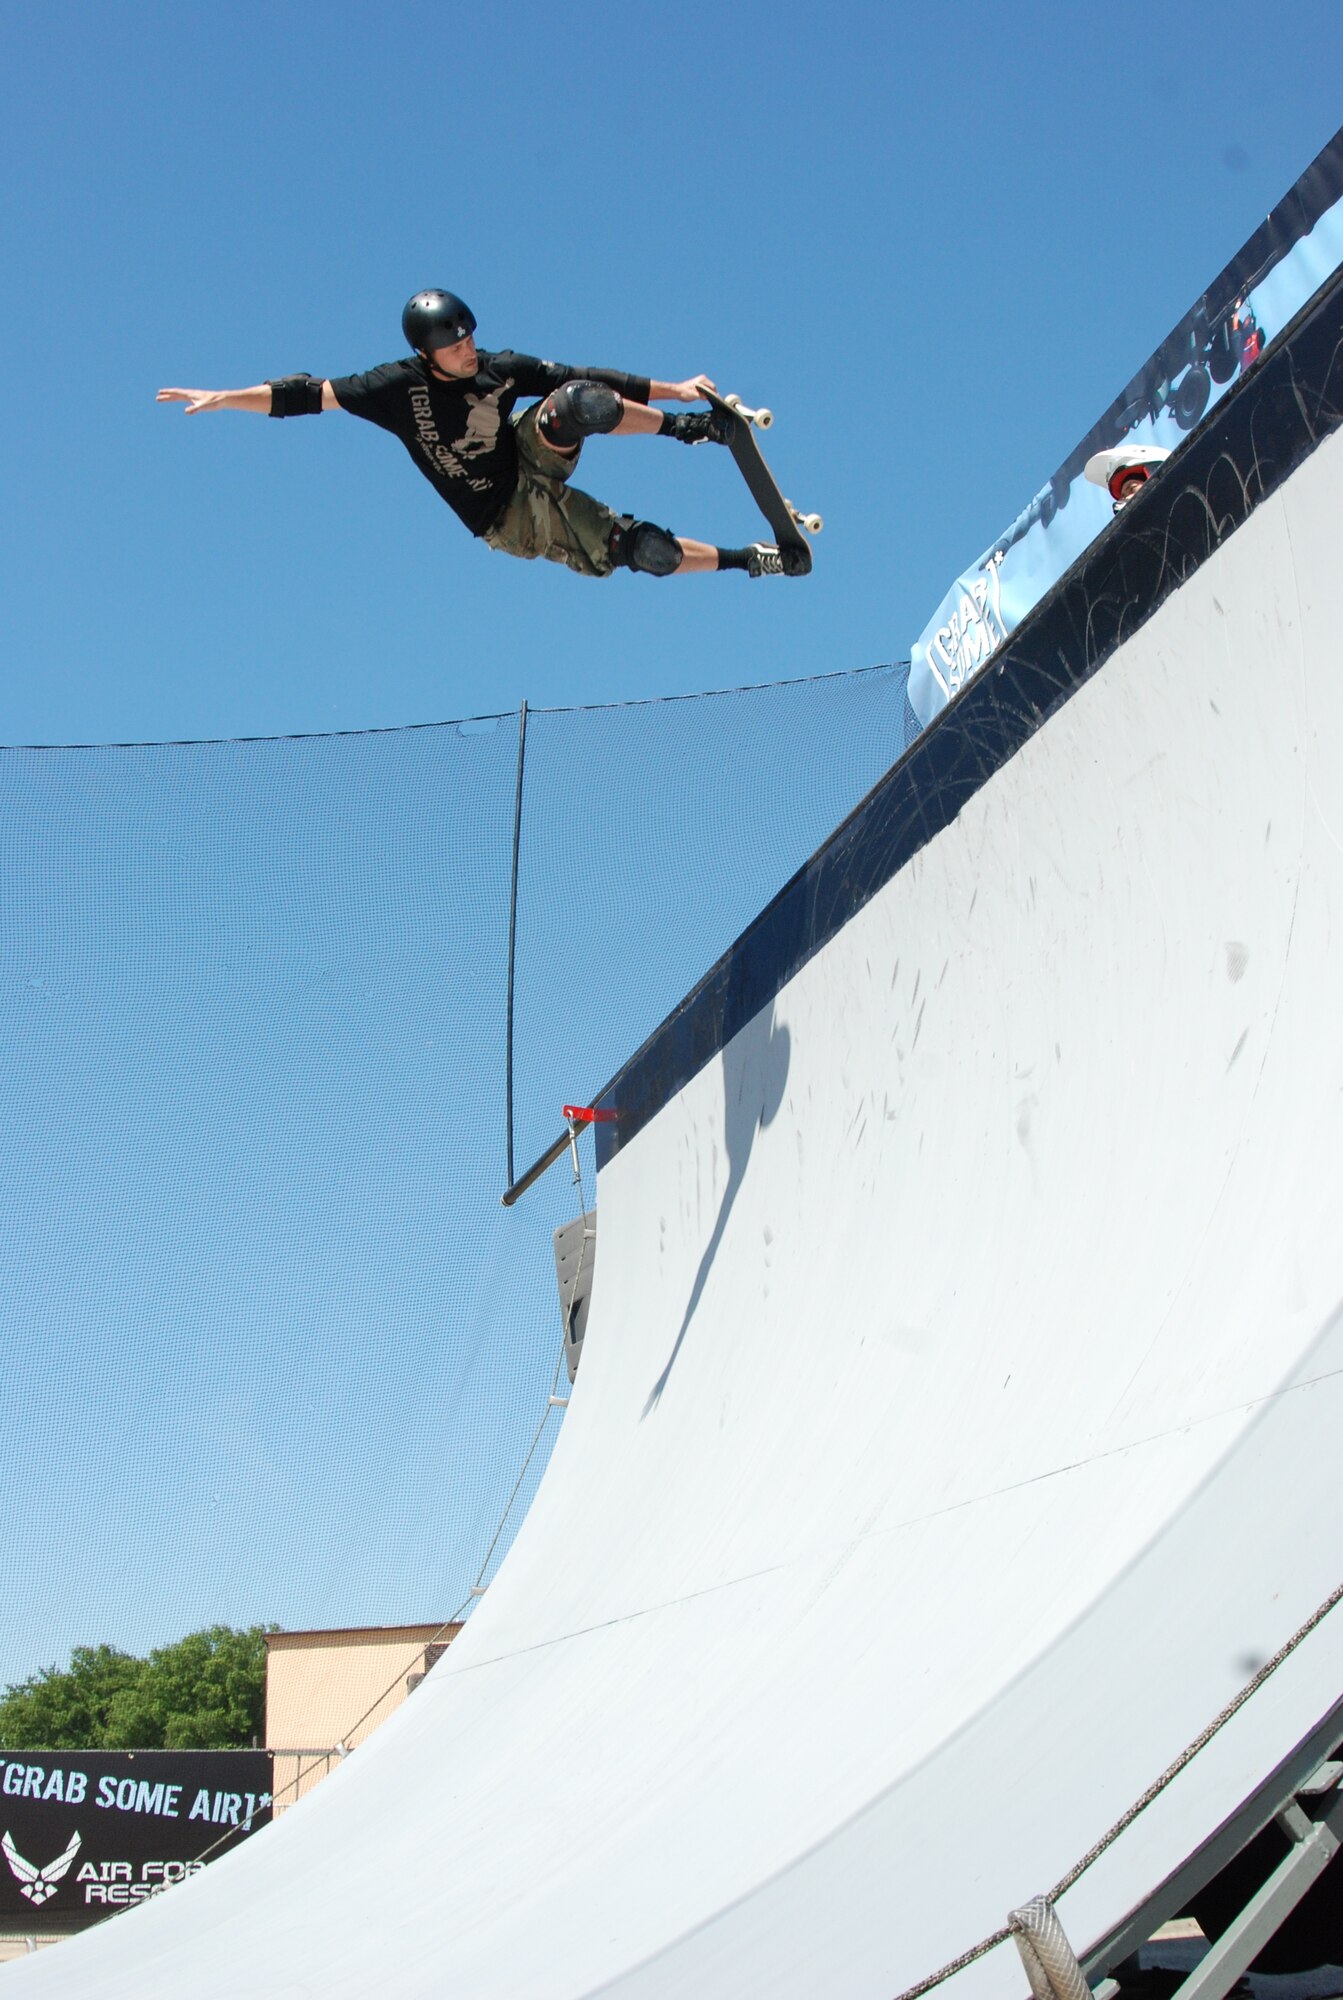 JOINT BASE ANDREWS, Md. -- Jay Stevason, a team skateboarder for ASA Entertainment, grabs his board above the ramp at the Joint Service Open House here May 15. Mr. Stevason joins other extreme athletes in supporting the Air Force Reserve recruiting campaign, "Grab Some Air," which aims at attracting an active demographic of 17-34 year-olds to the Reserve. The JSOH allows members of the public an excellent opportunity to meet and interact with the men and women of the Armed Forces and to show them America’s skilled military. (U.S. Air Force photo/Capt. Rebecca Garcia) 
